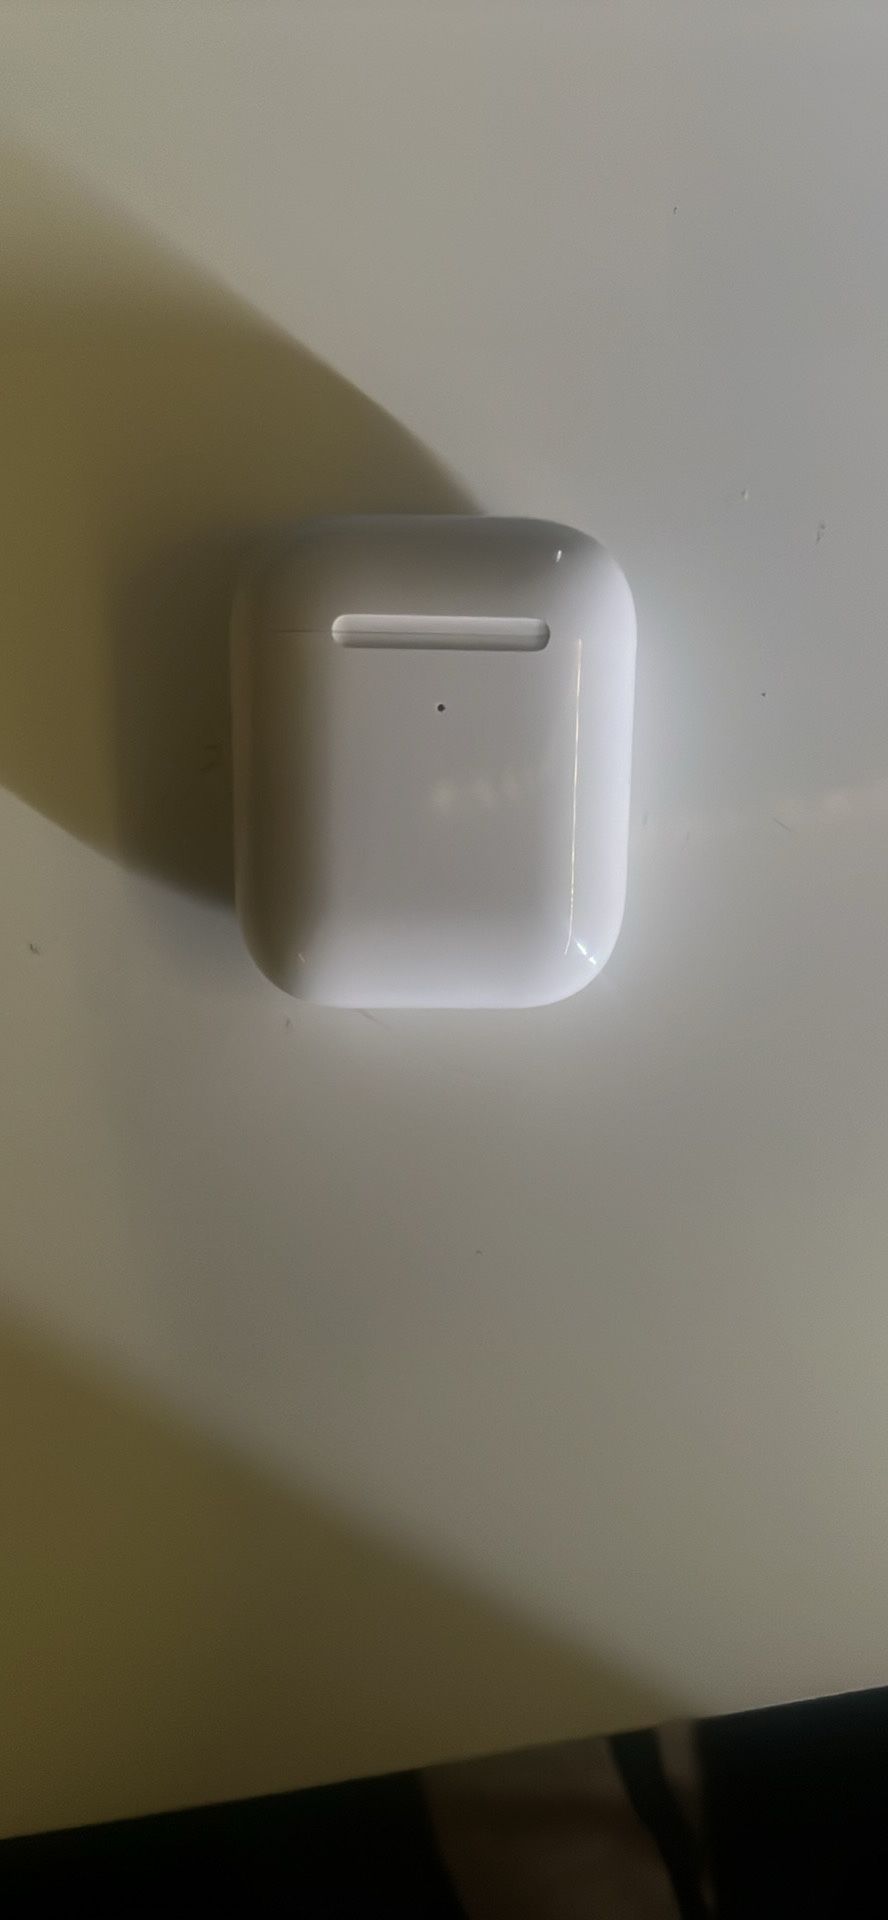 *BEST OFFER* AirPods Generation 2